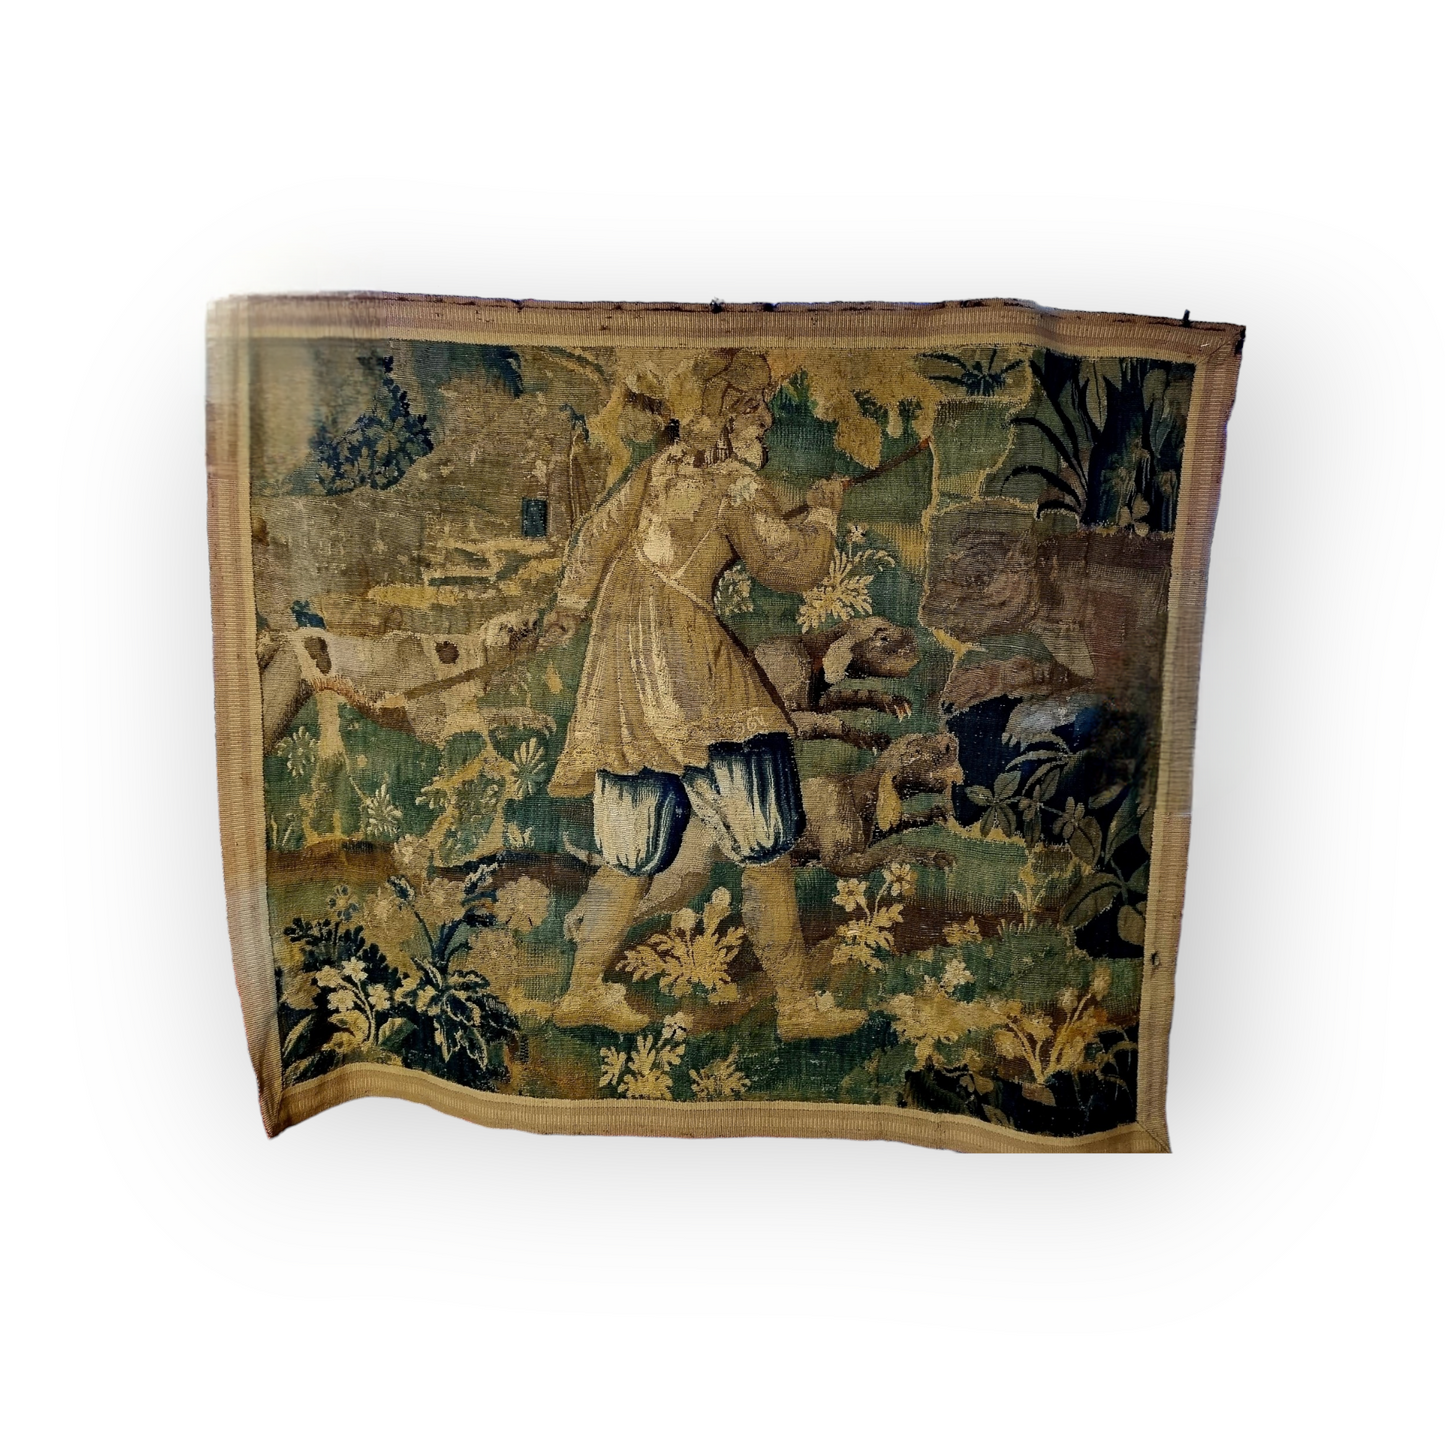 A Large 17th Century Flemish Antique Verdure Tapestry Fragment Depicting A Huntsman With Dogs And A Bear